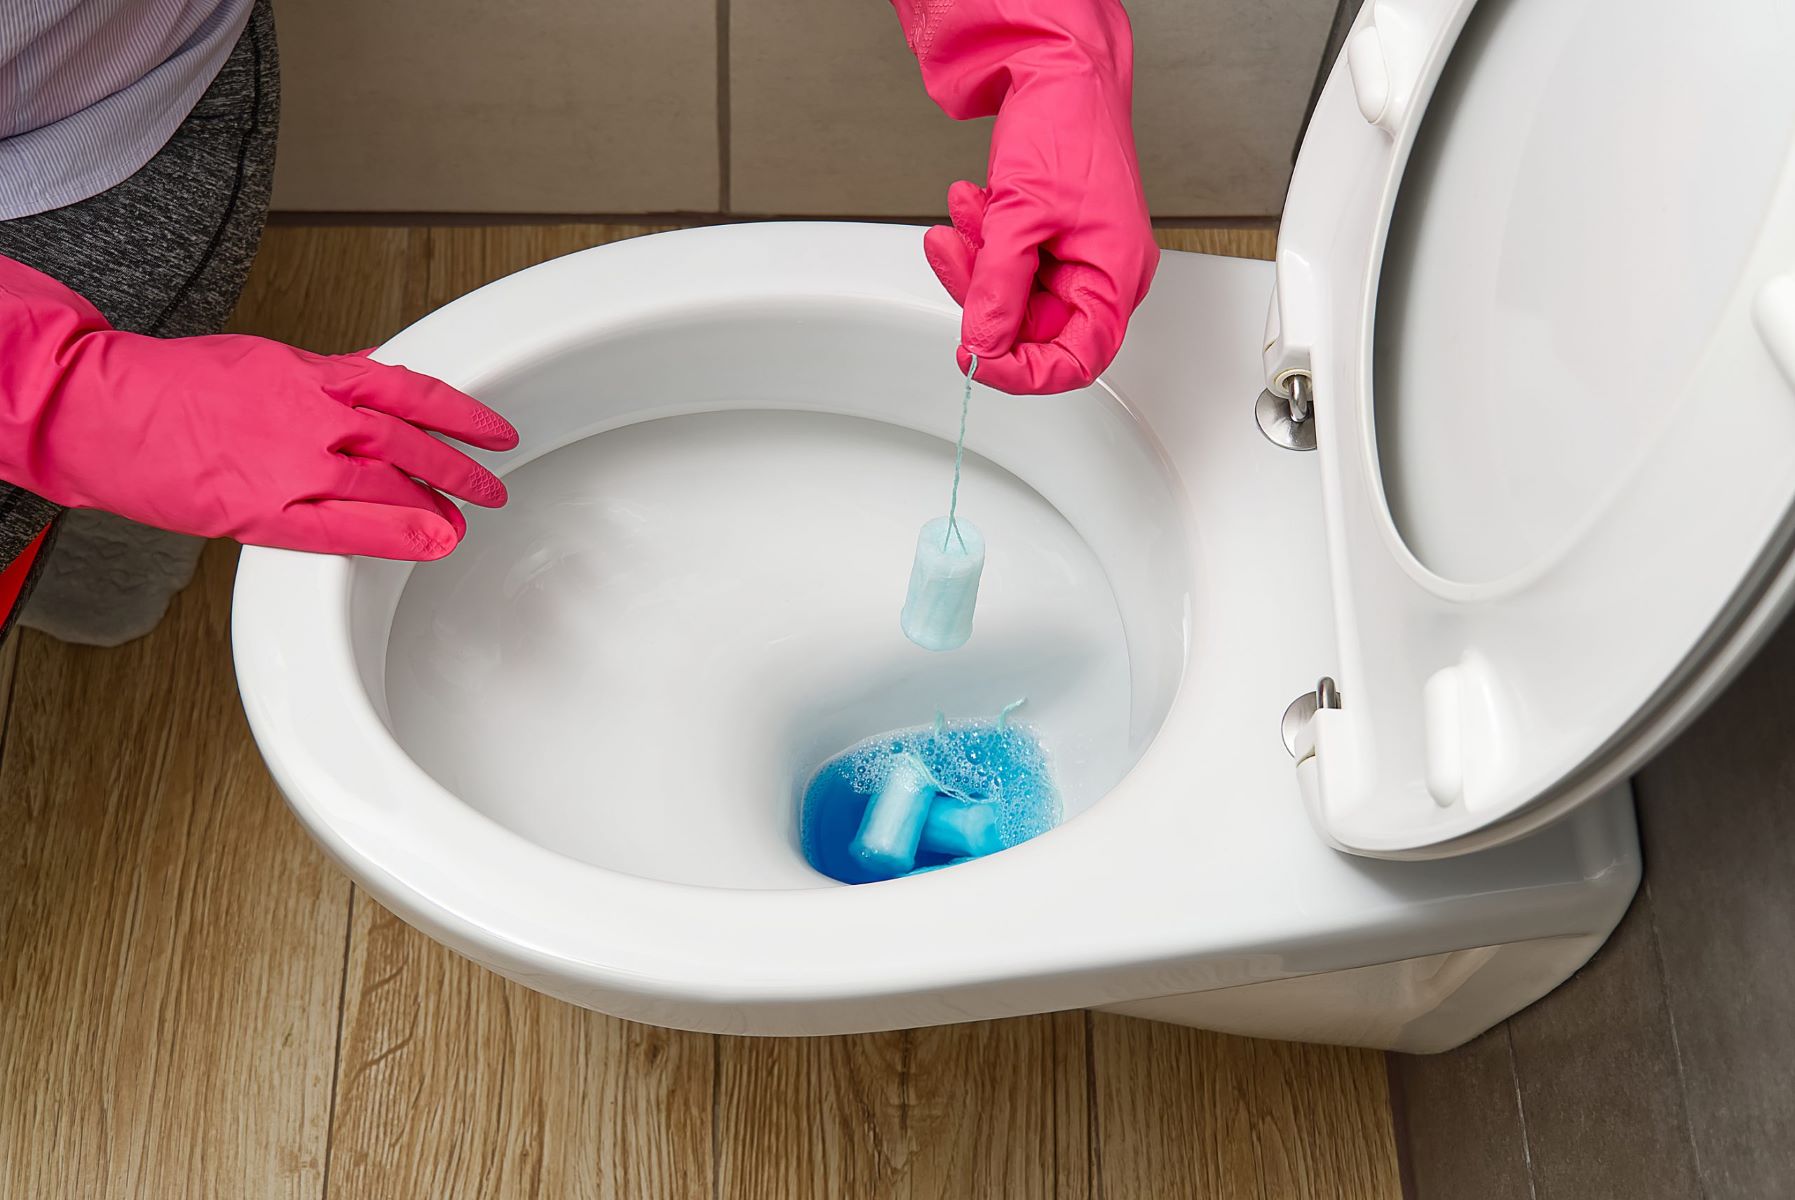 Revolutionary Tips To Fix Weak Toilet Flushes - Say Goodbye To Water Filling Up!